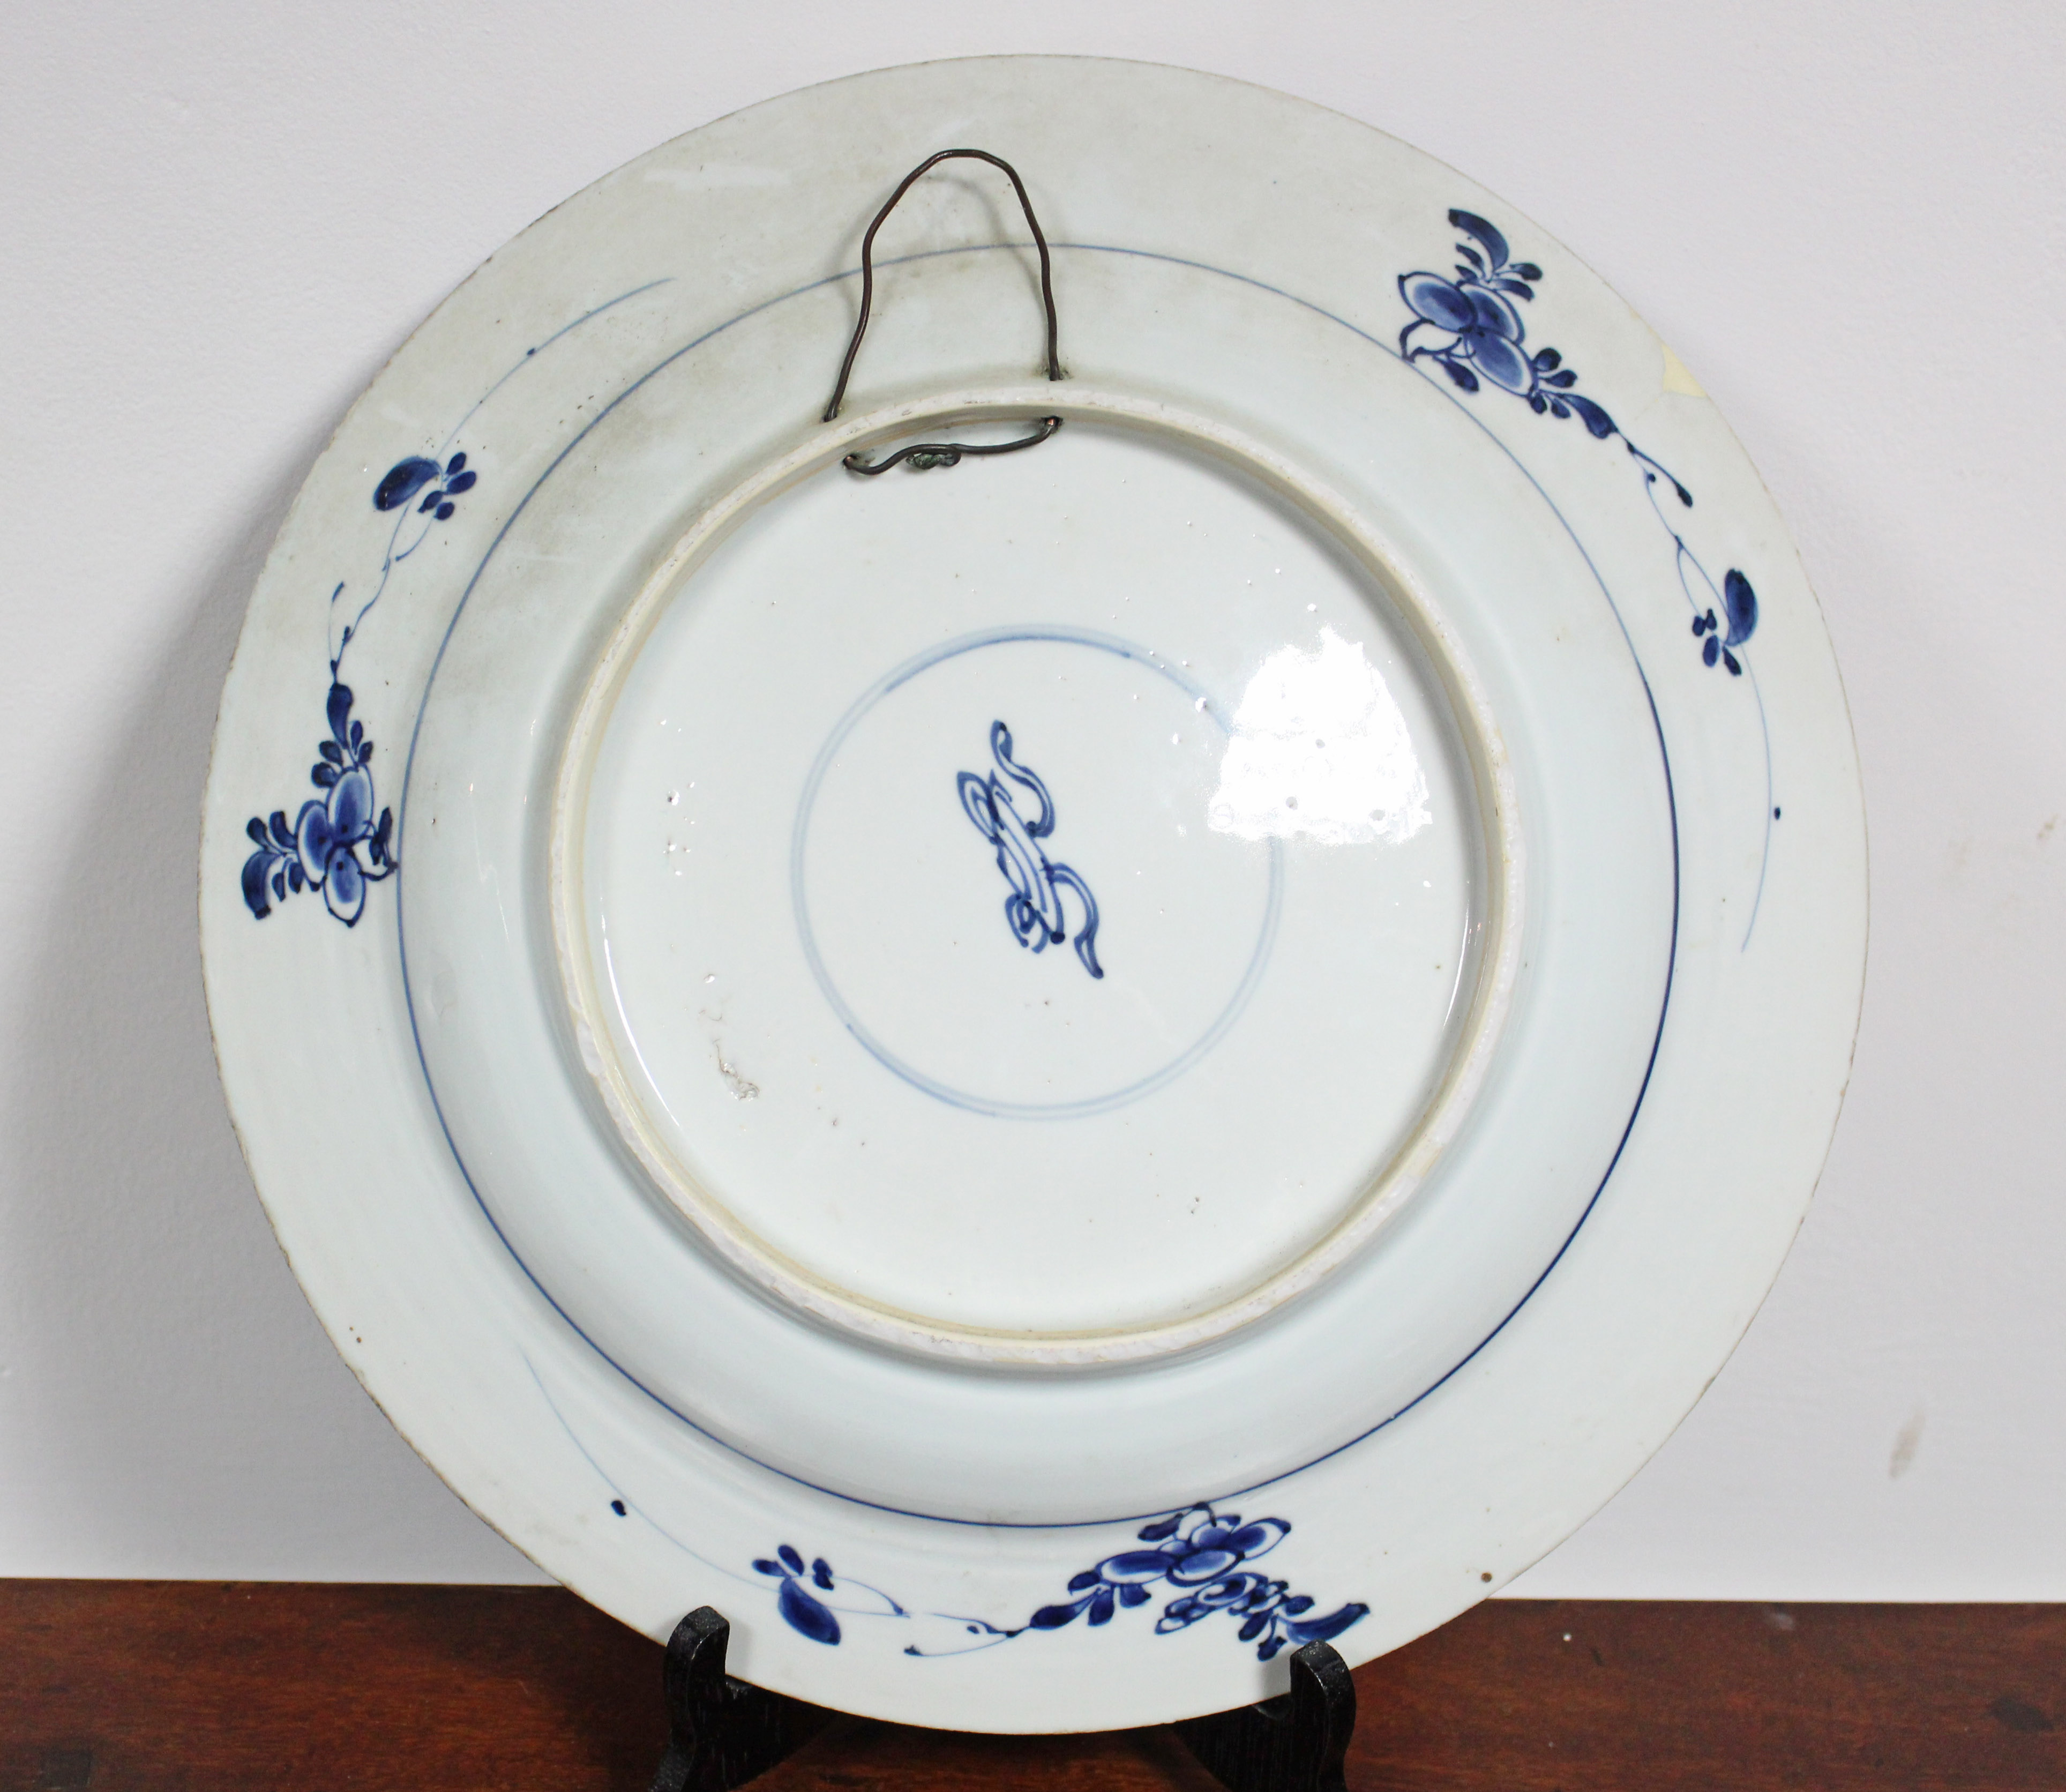 An 18th century Chinese blue & white porcelain large shallow dish painted with pheasants & songbirds - Image 2 of 2